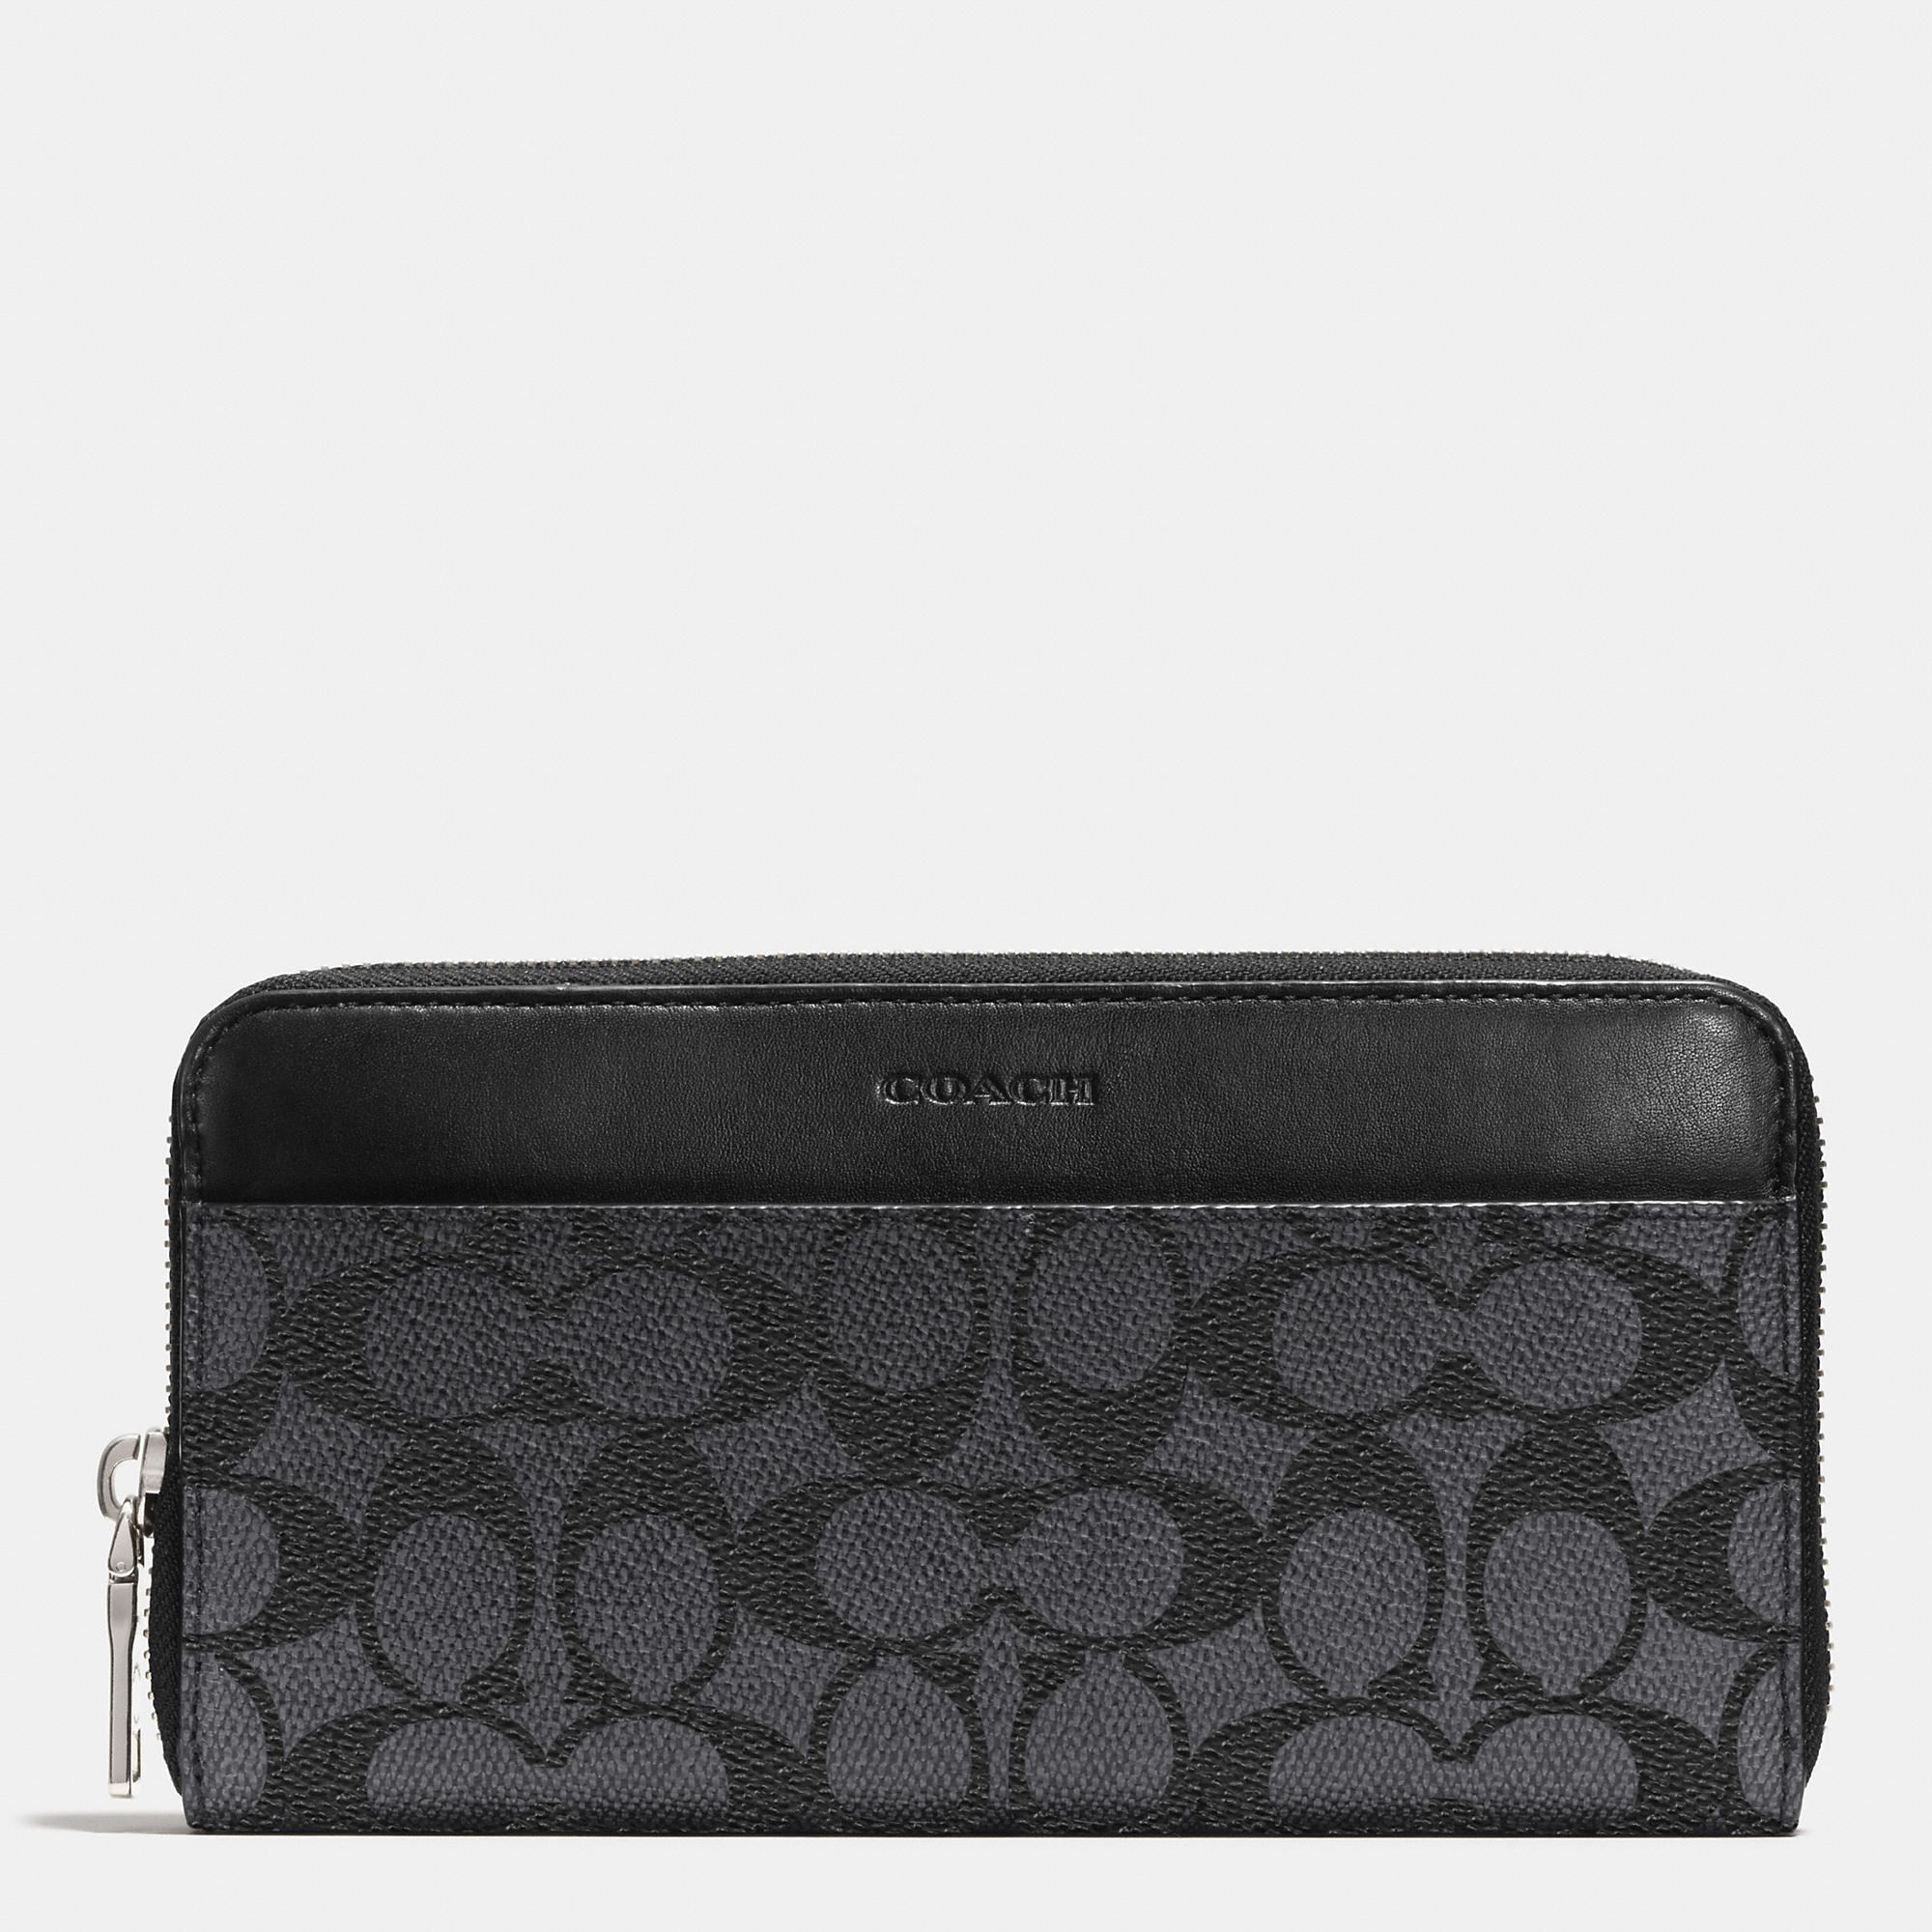 Coach Accordion Wallet In Signature Canvas in Black | Lyst